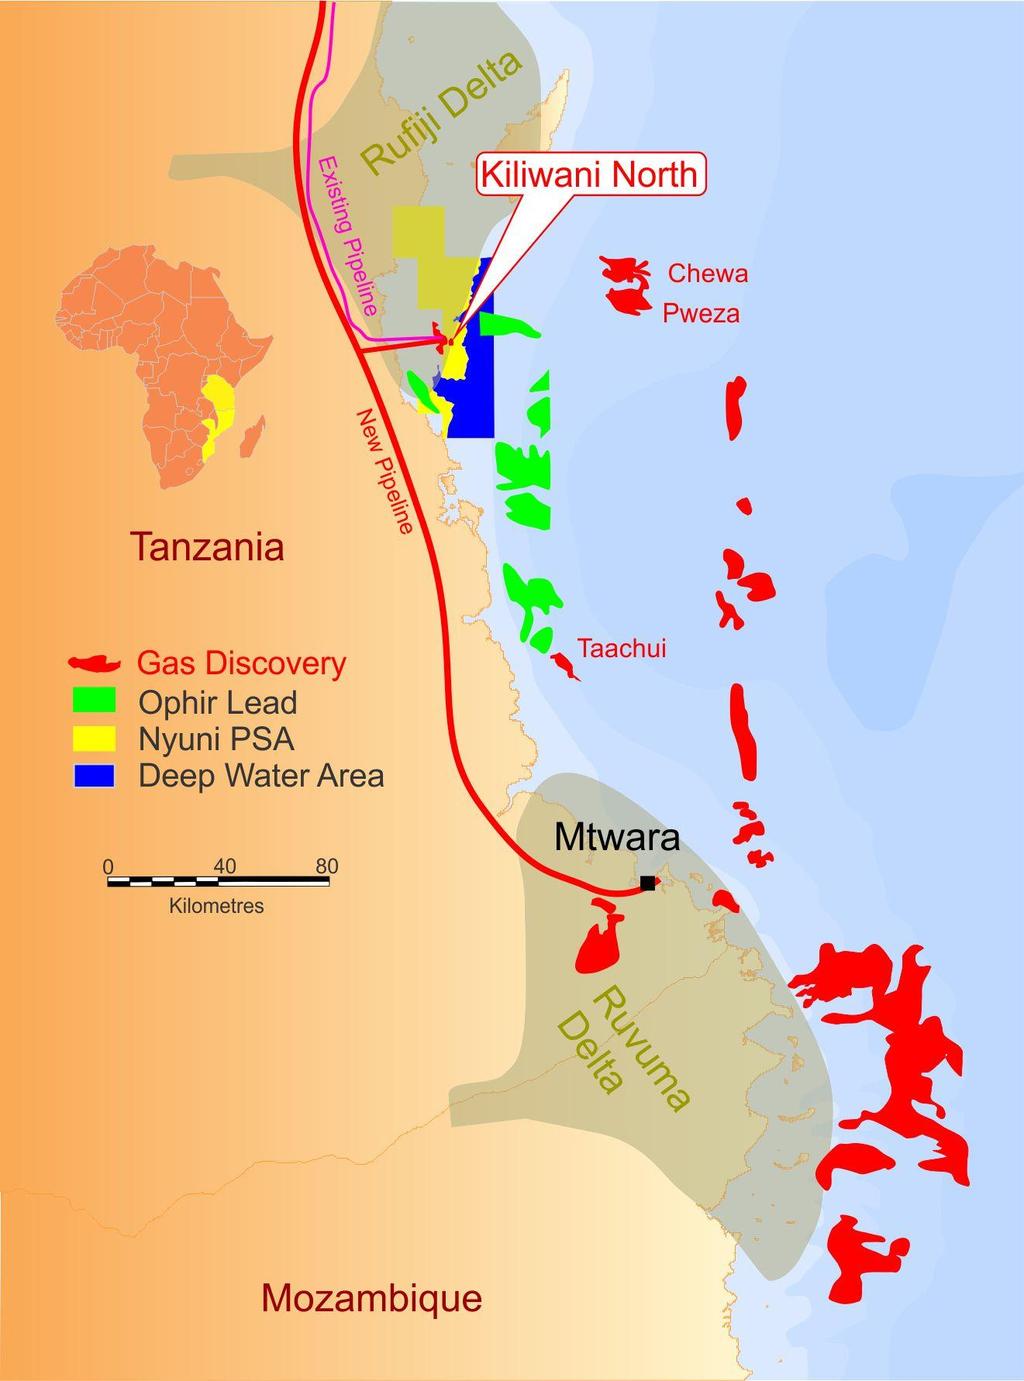 Tanzania - Regional Setting Deep water offshore Tanzania and Mozambique has seen over 170 TCF of gas discoveries in deep water channel/fan systems related to the Rufiji and Ruvuma Deltas Major